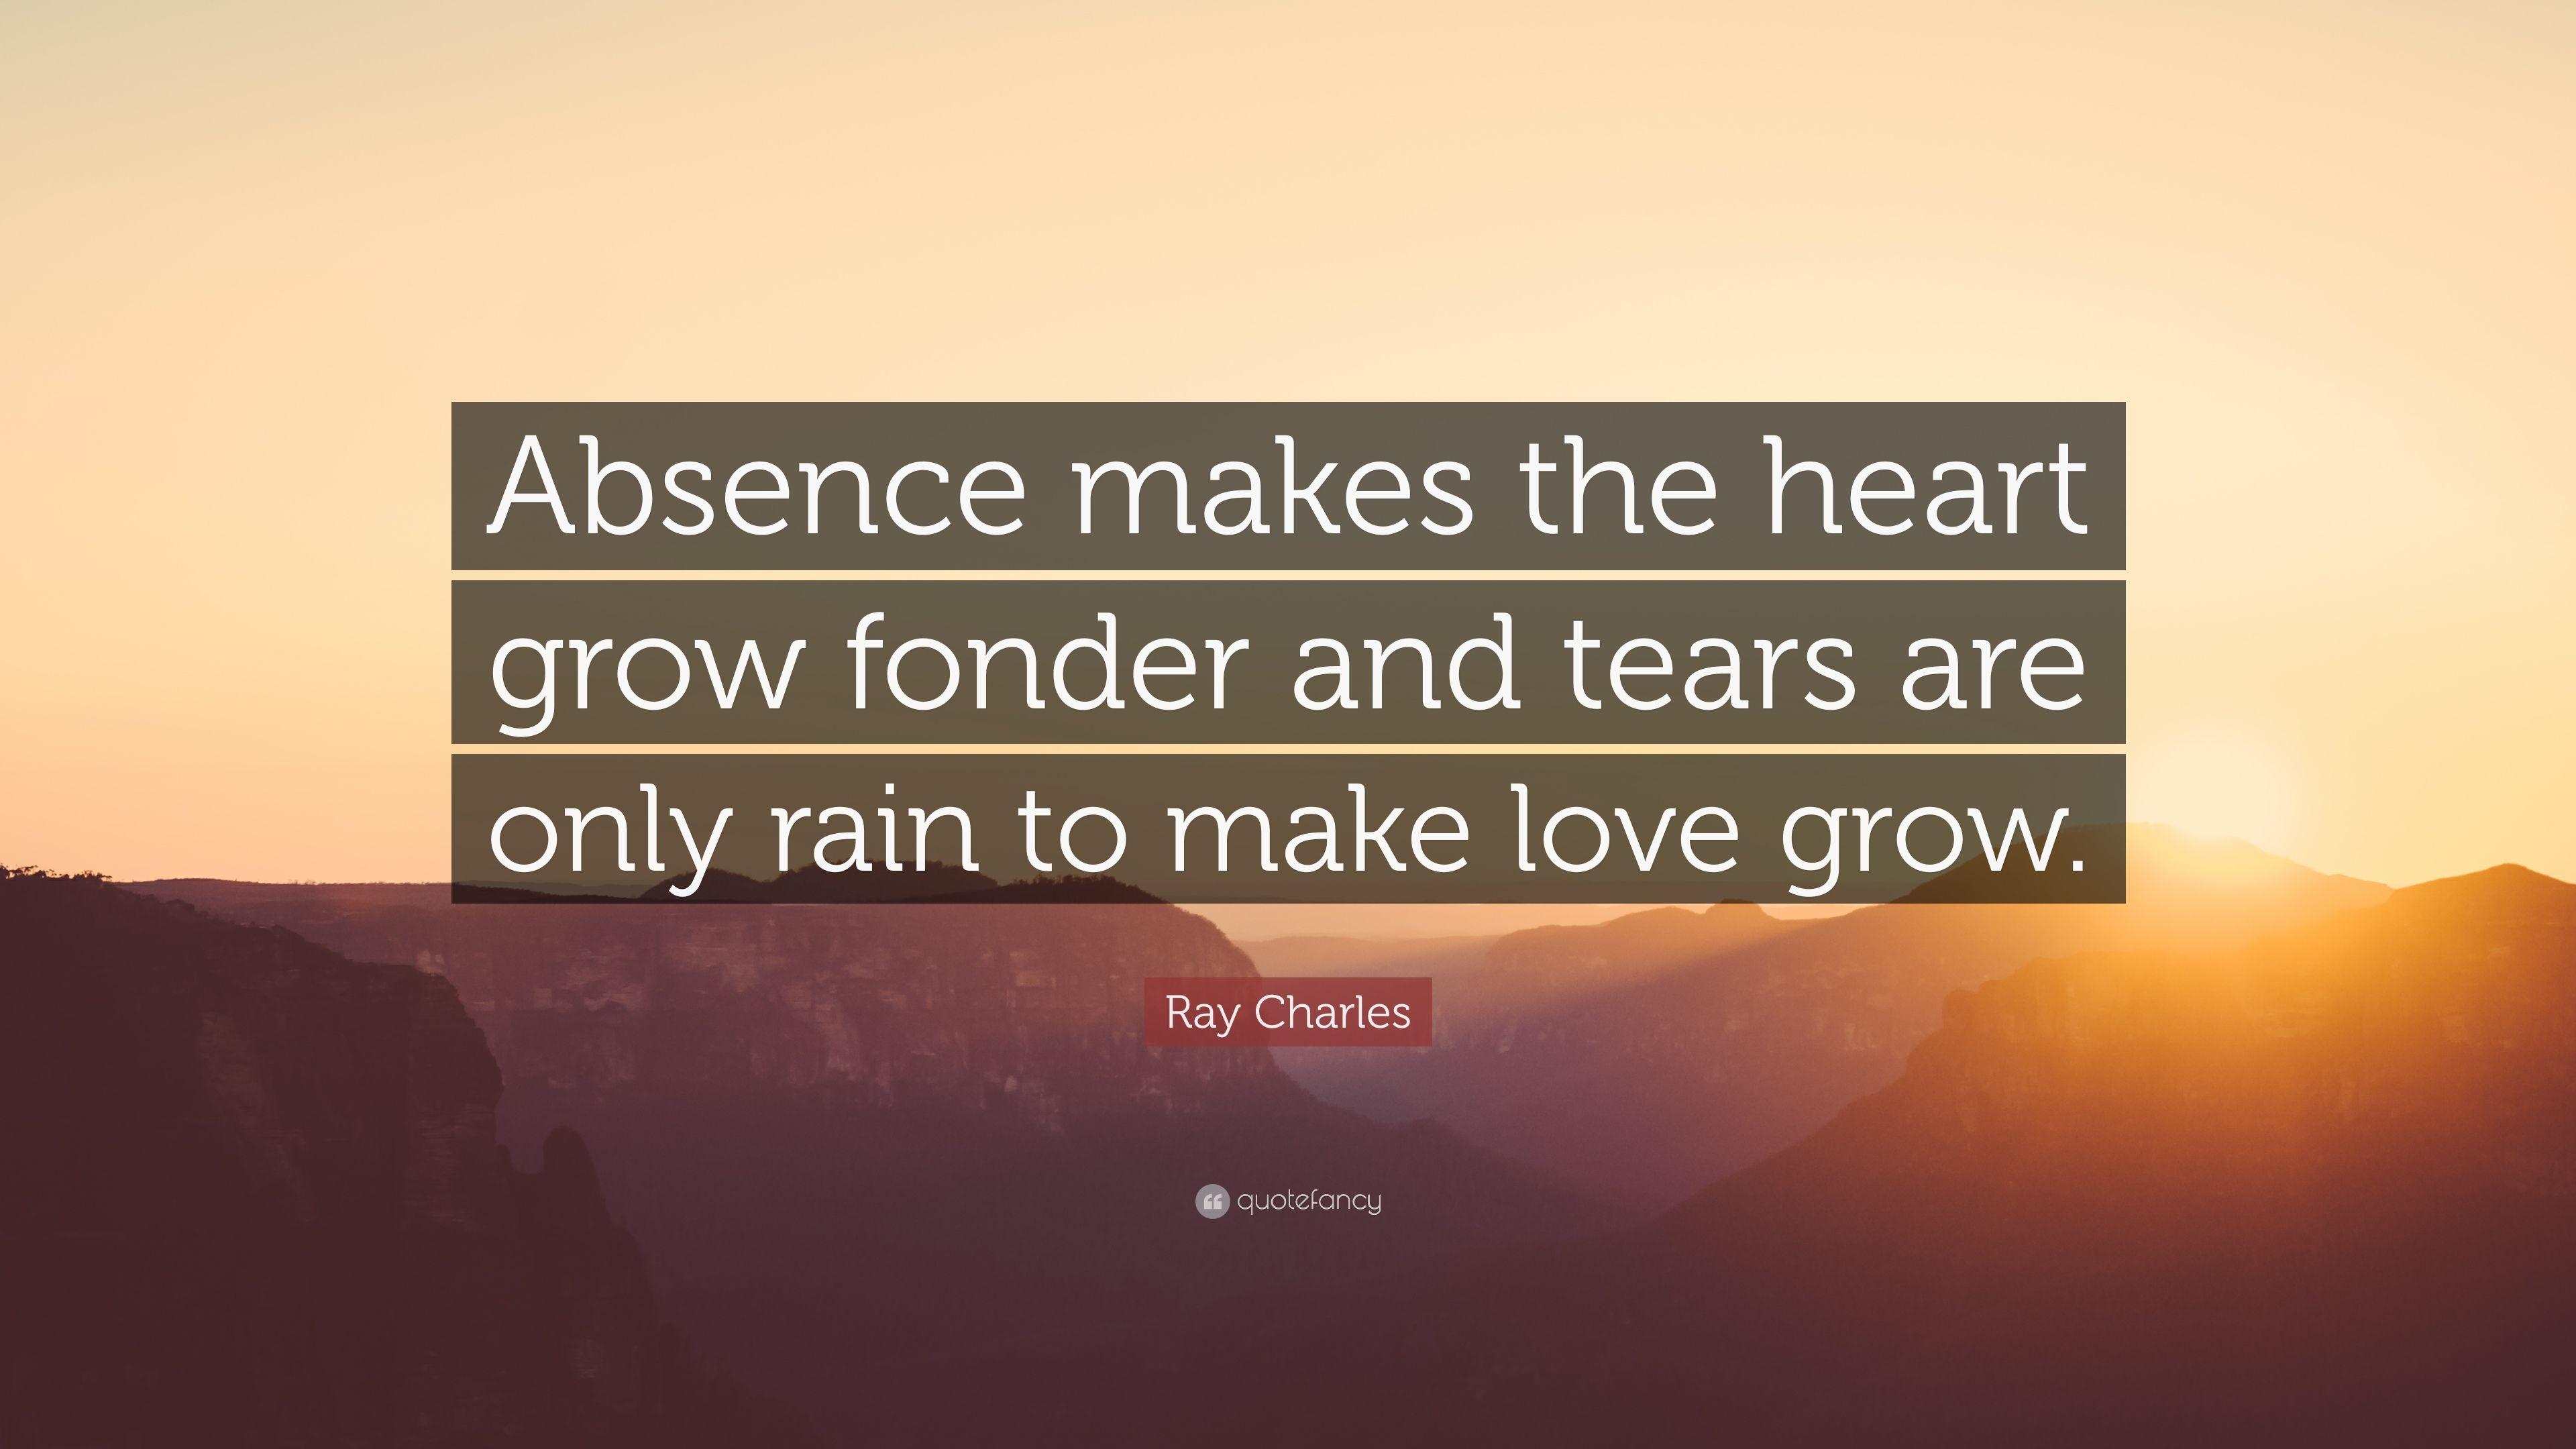 Ray Charles Quote: “Absence makes the heart grow fonder and tears